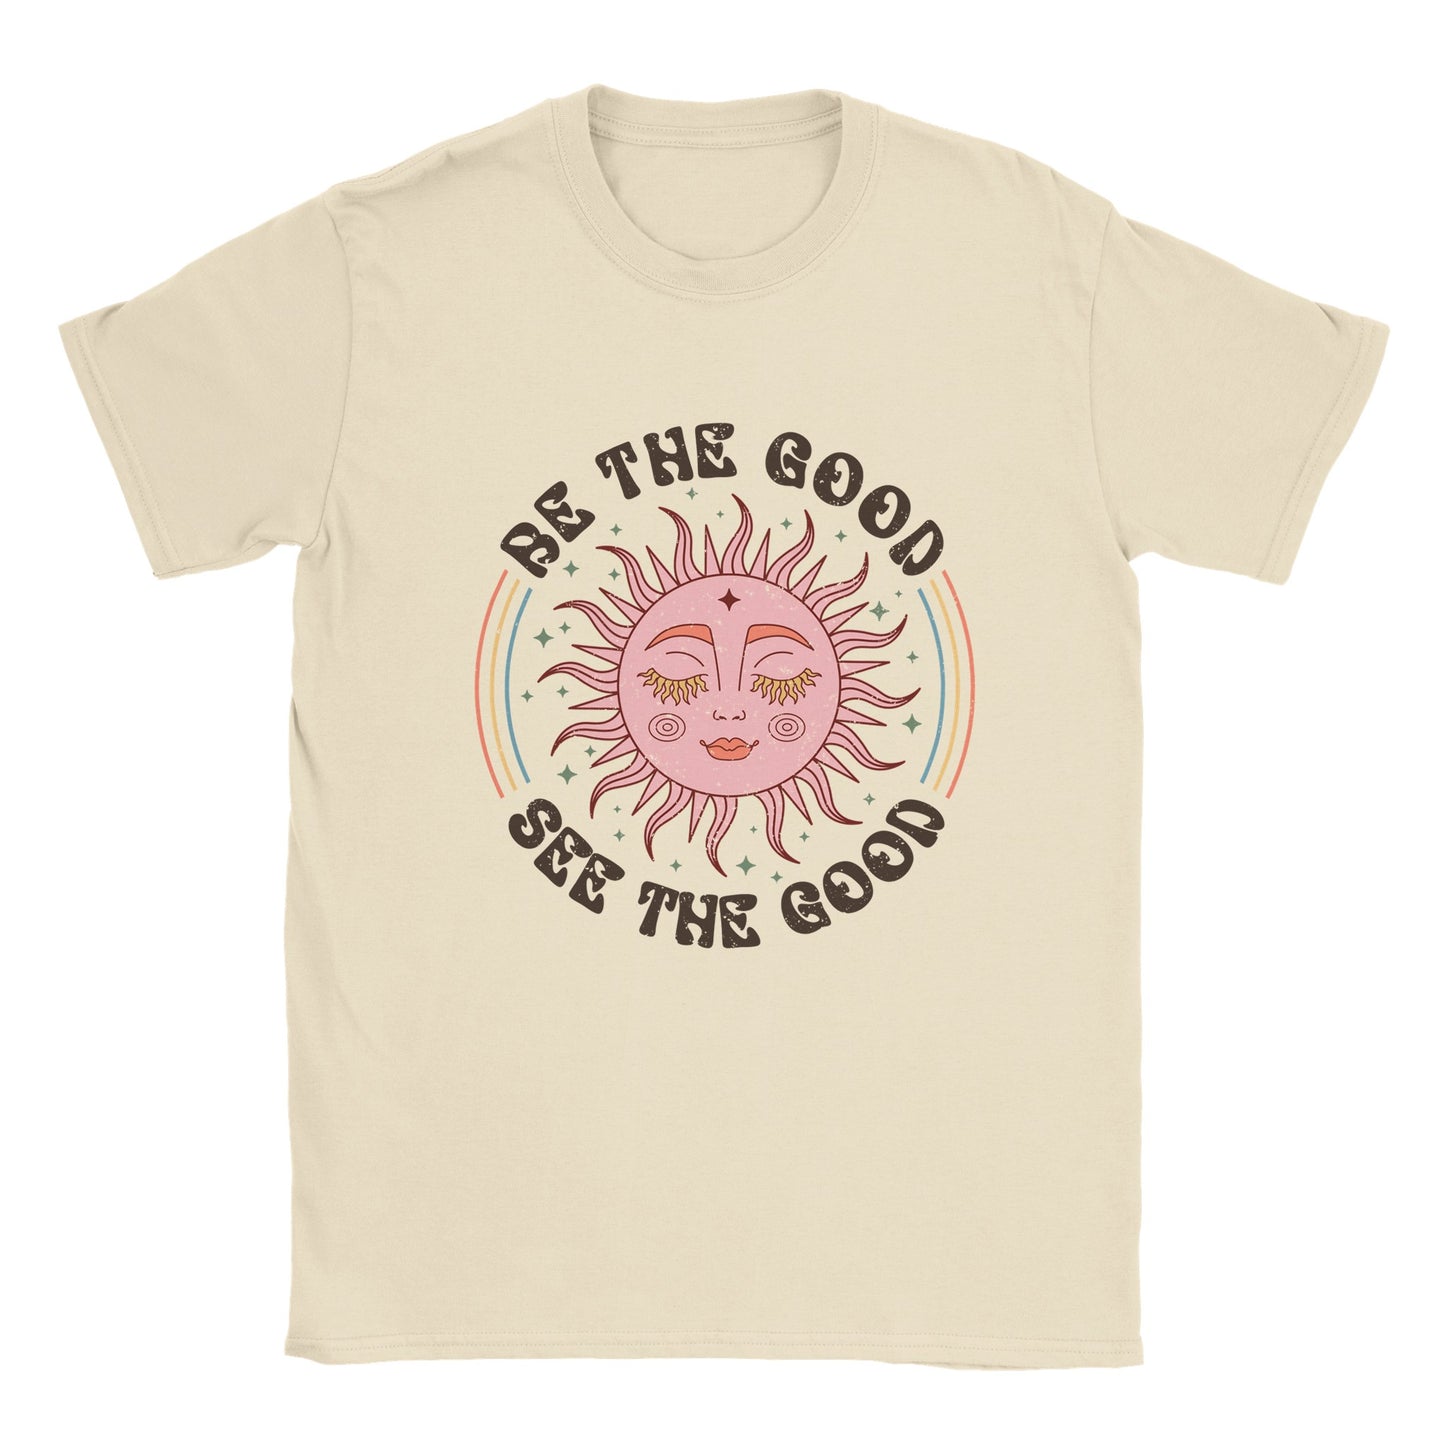 Be The Good, See The Good - Classic Unisex Crewneck T-shirt